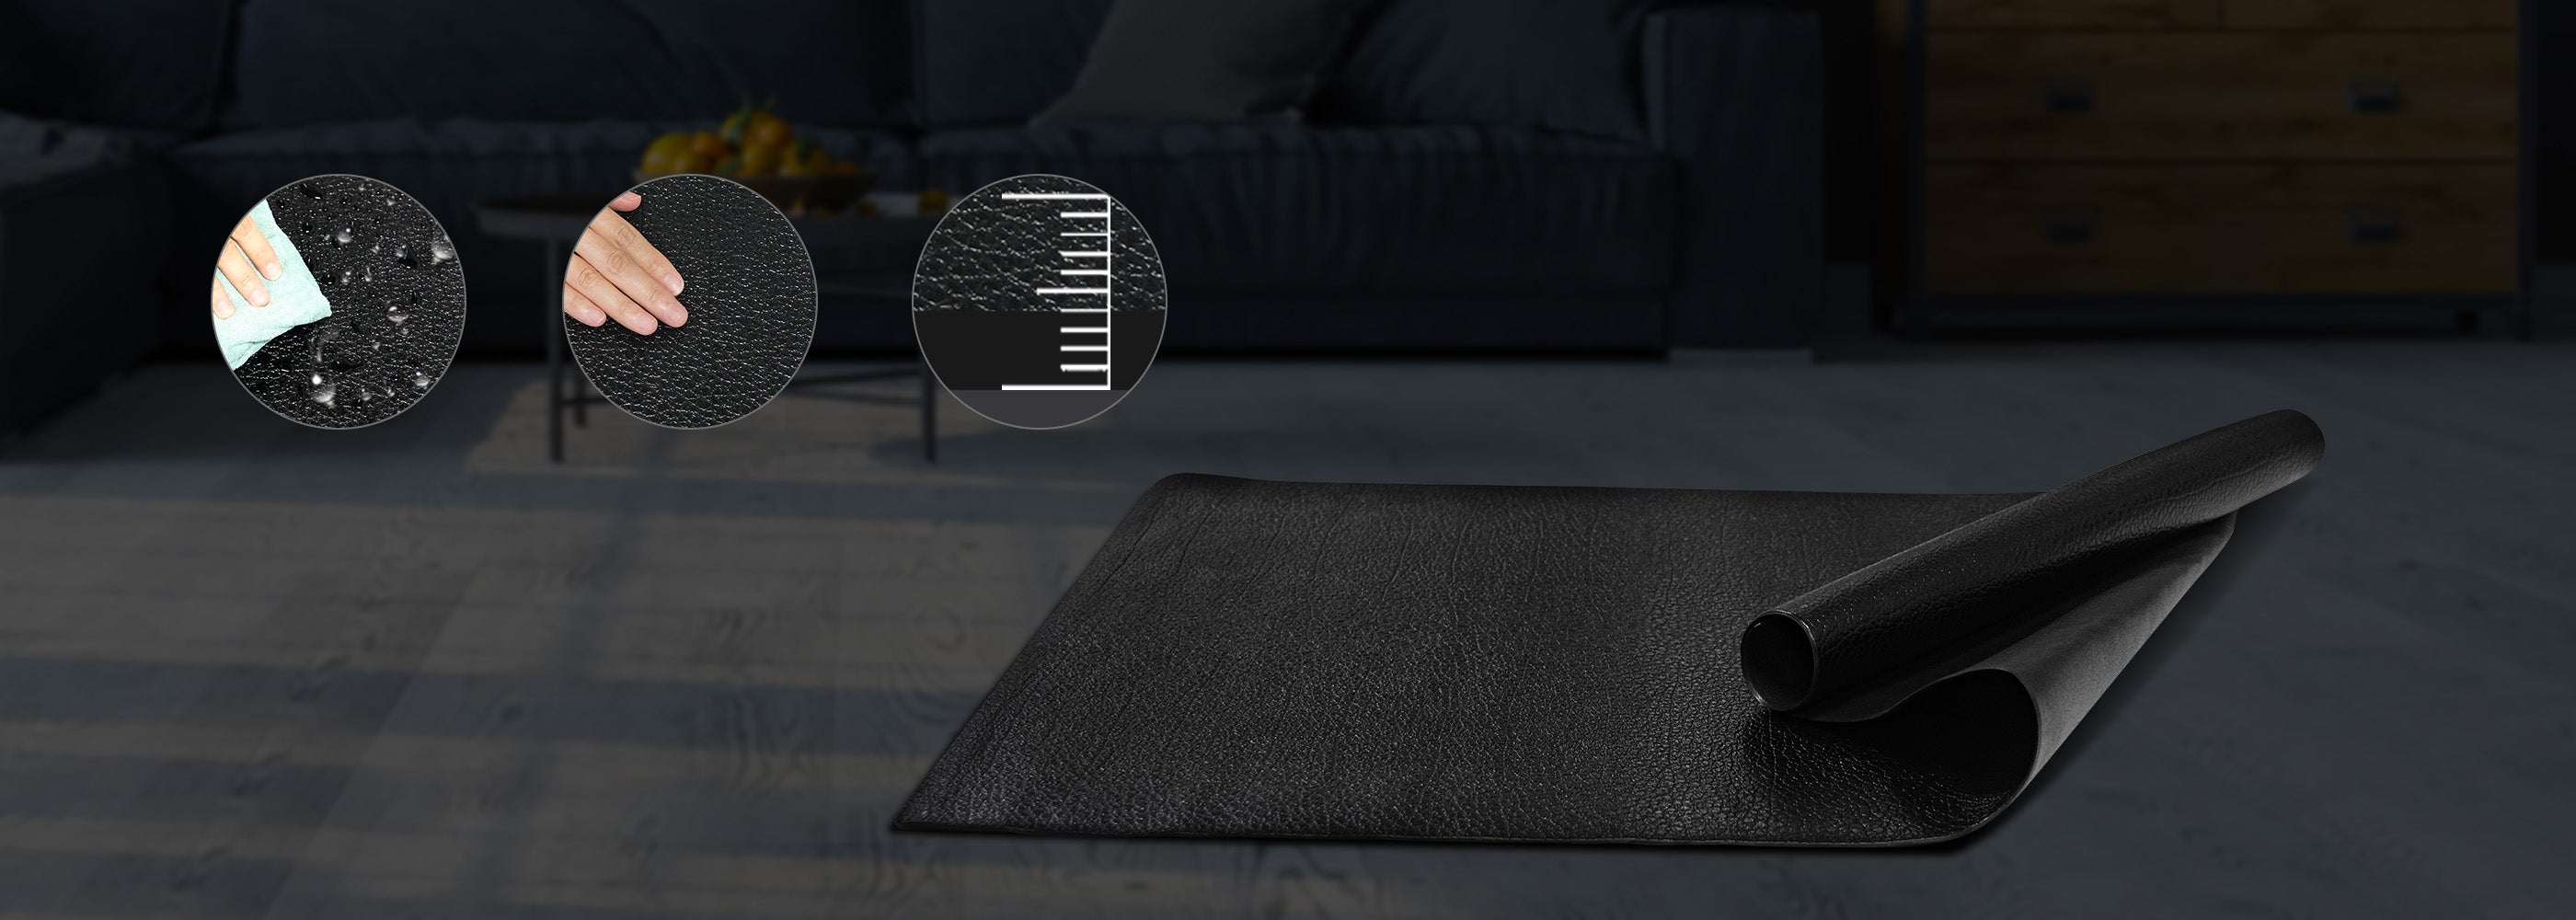 High Elastic Material Mat We provide with the exercise bike mat for hardwood floors & carpet.non-slip surface & extra-dense scratch resistant. lt can be folded up when not in use for easy storage